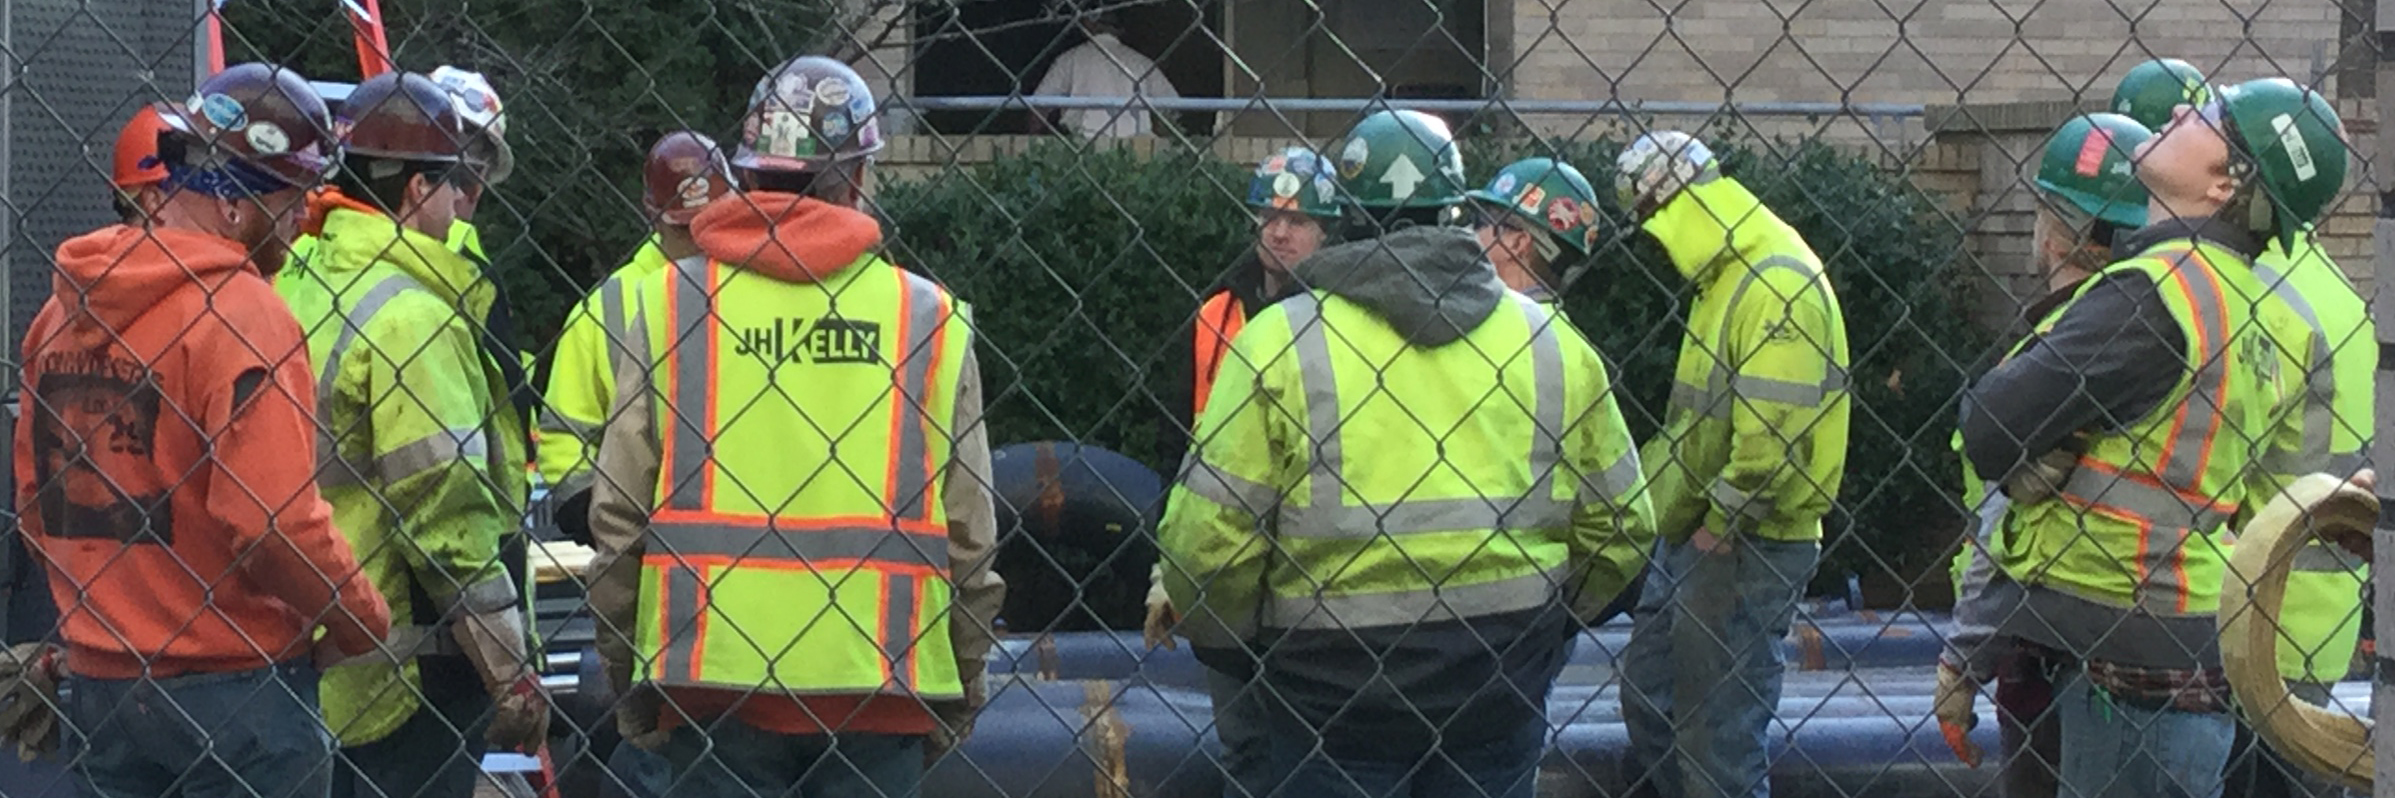 construction safety meeting